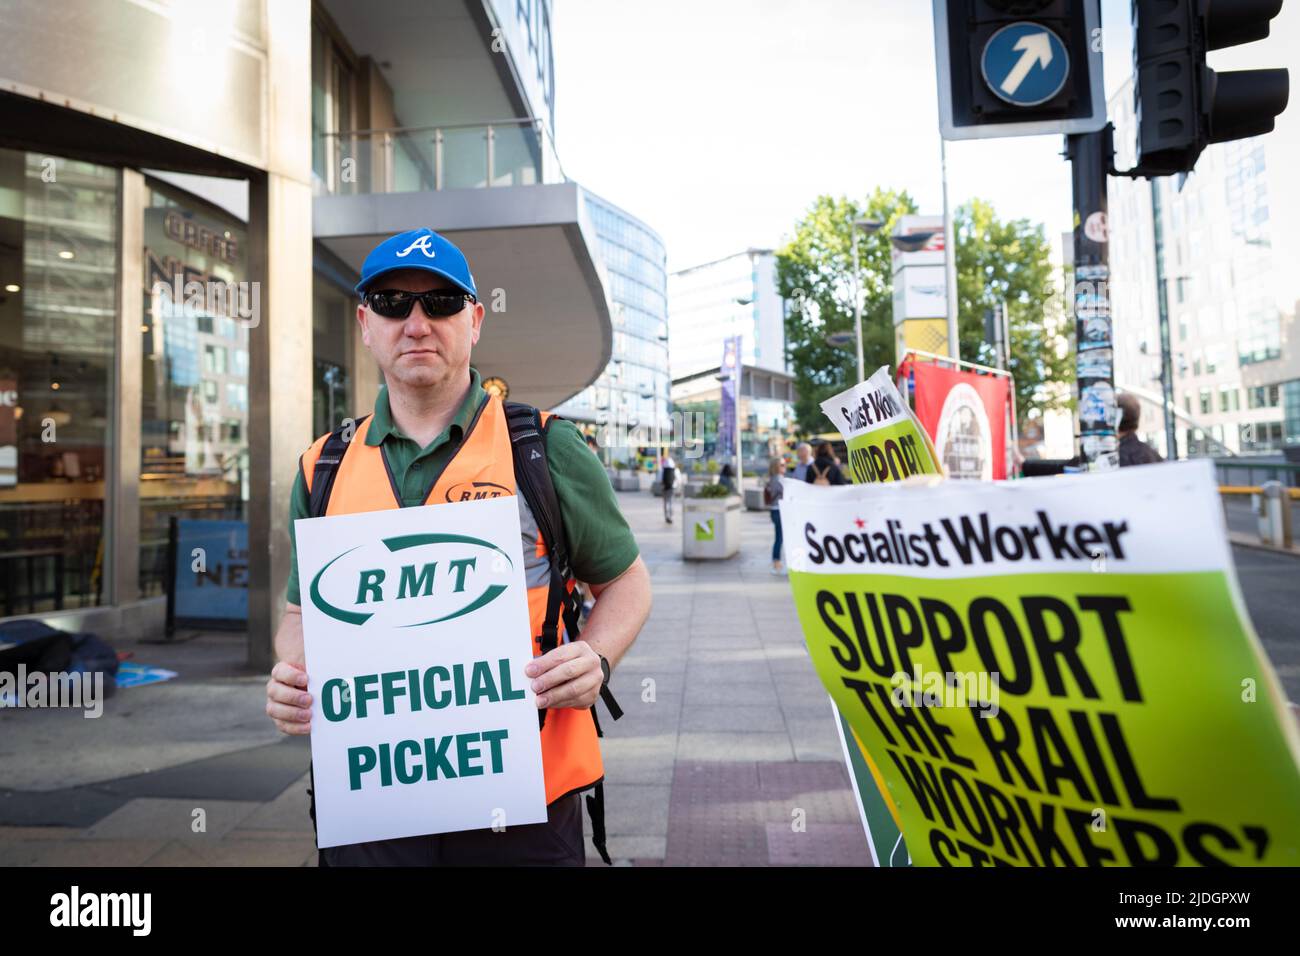 Manchester, UK. 21st June, 2022. A union member holds placard and joins the picket line at Piccadilly train station. The biggest rail strike in over 30 years went ahead after last-minute talks failed. RMT states it has no choice but to strike due to proposed cuts to jobs, pay and pensions. Credit: Andy Barton/Alamy Live News Stock Photo